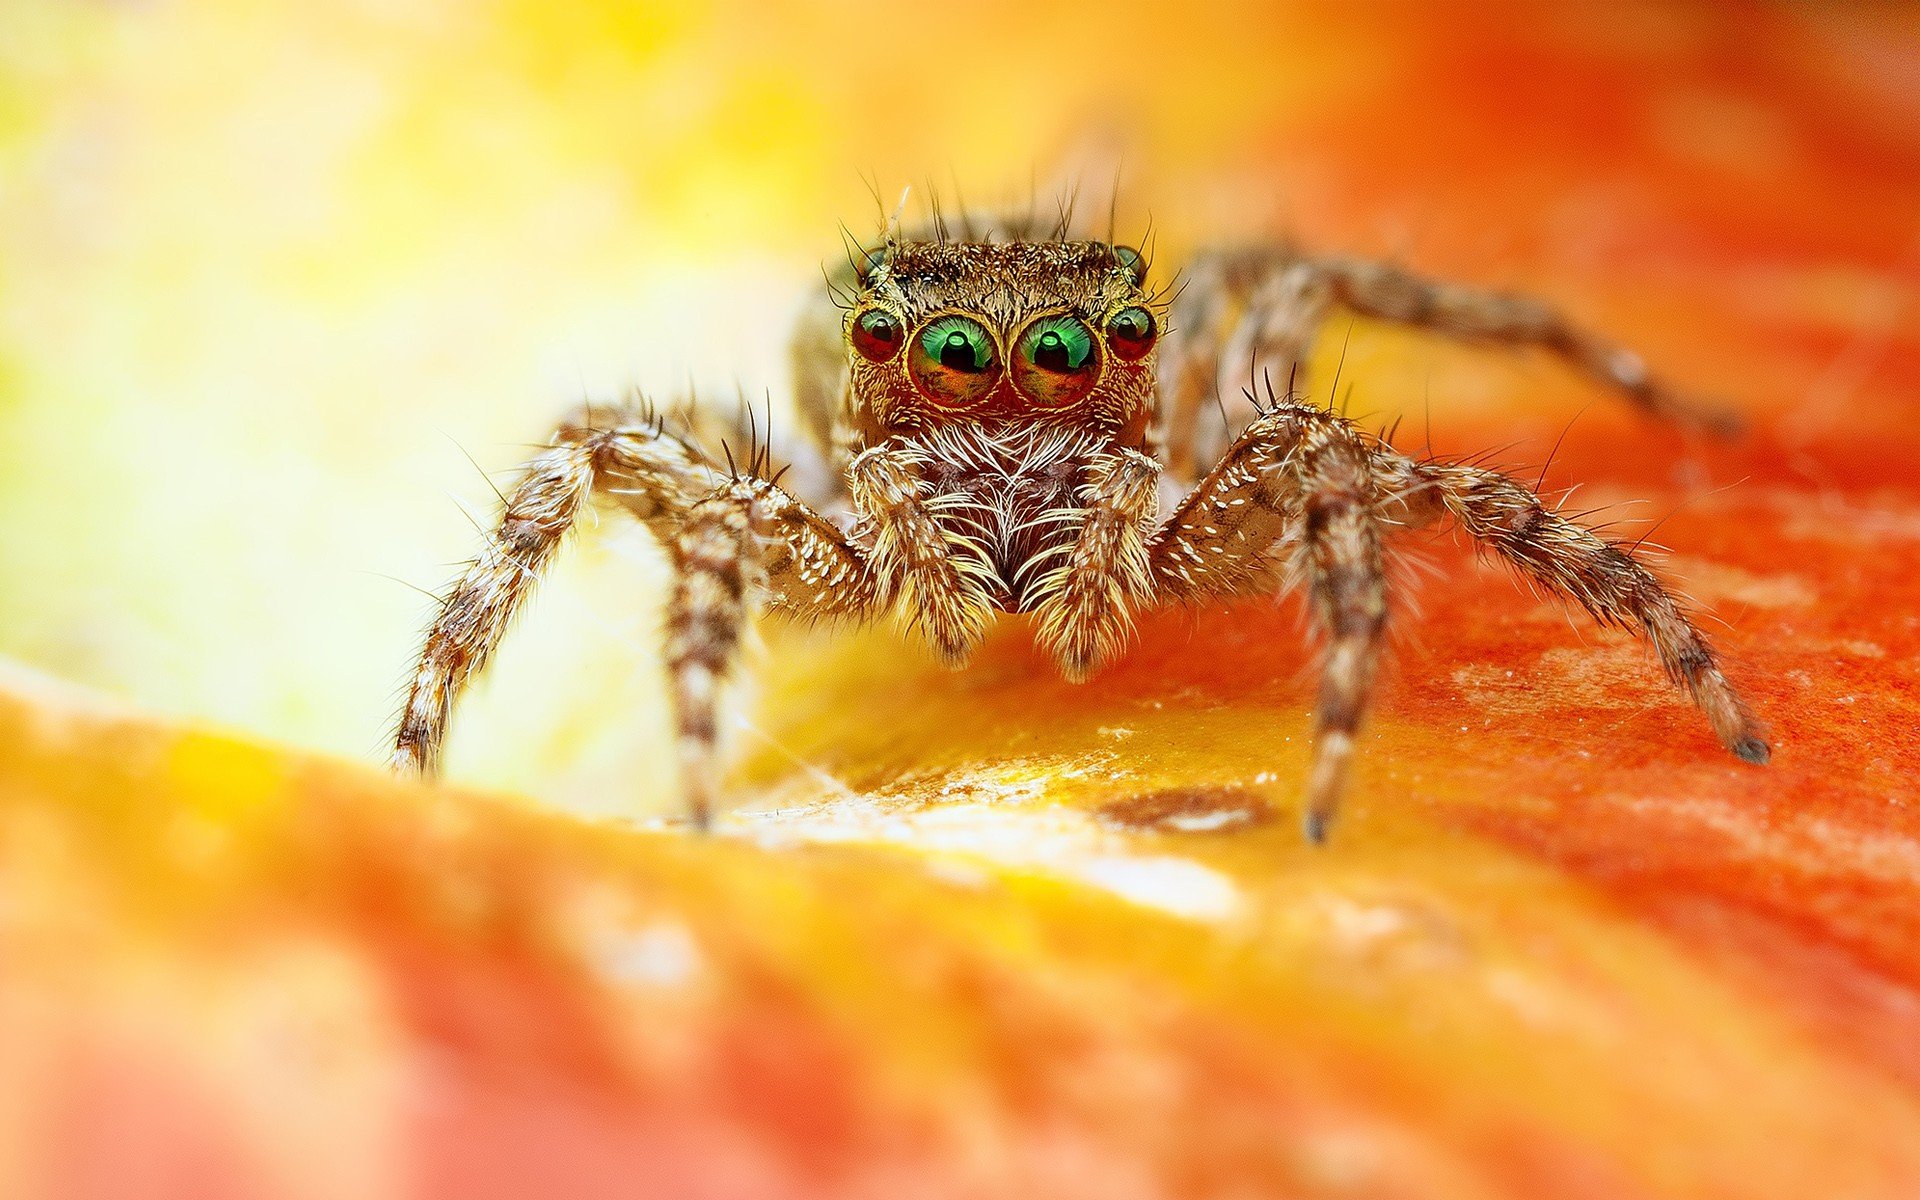 Spider Macro, HD Animals, 4k Wallpaper, Image, Background, Photo and Picture